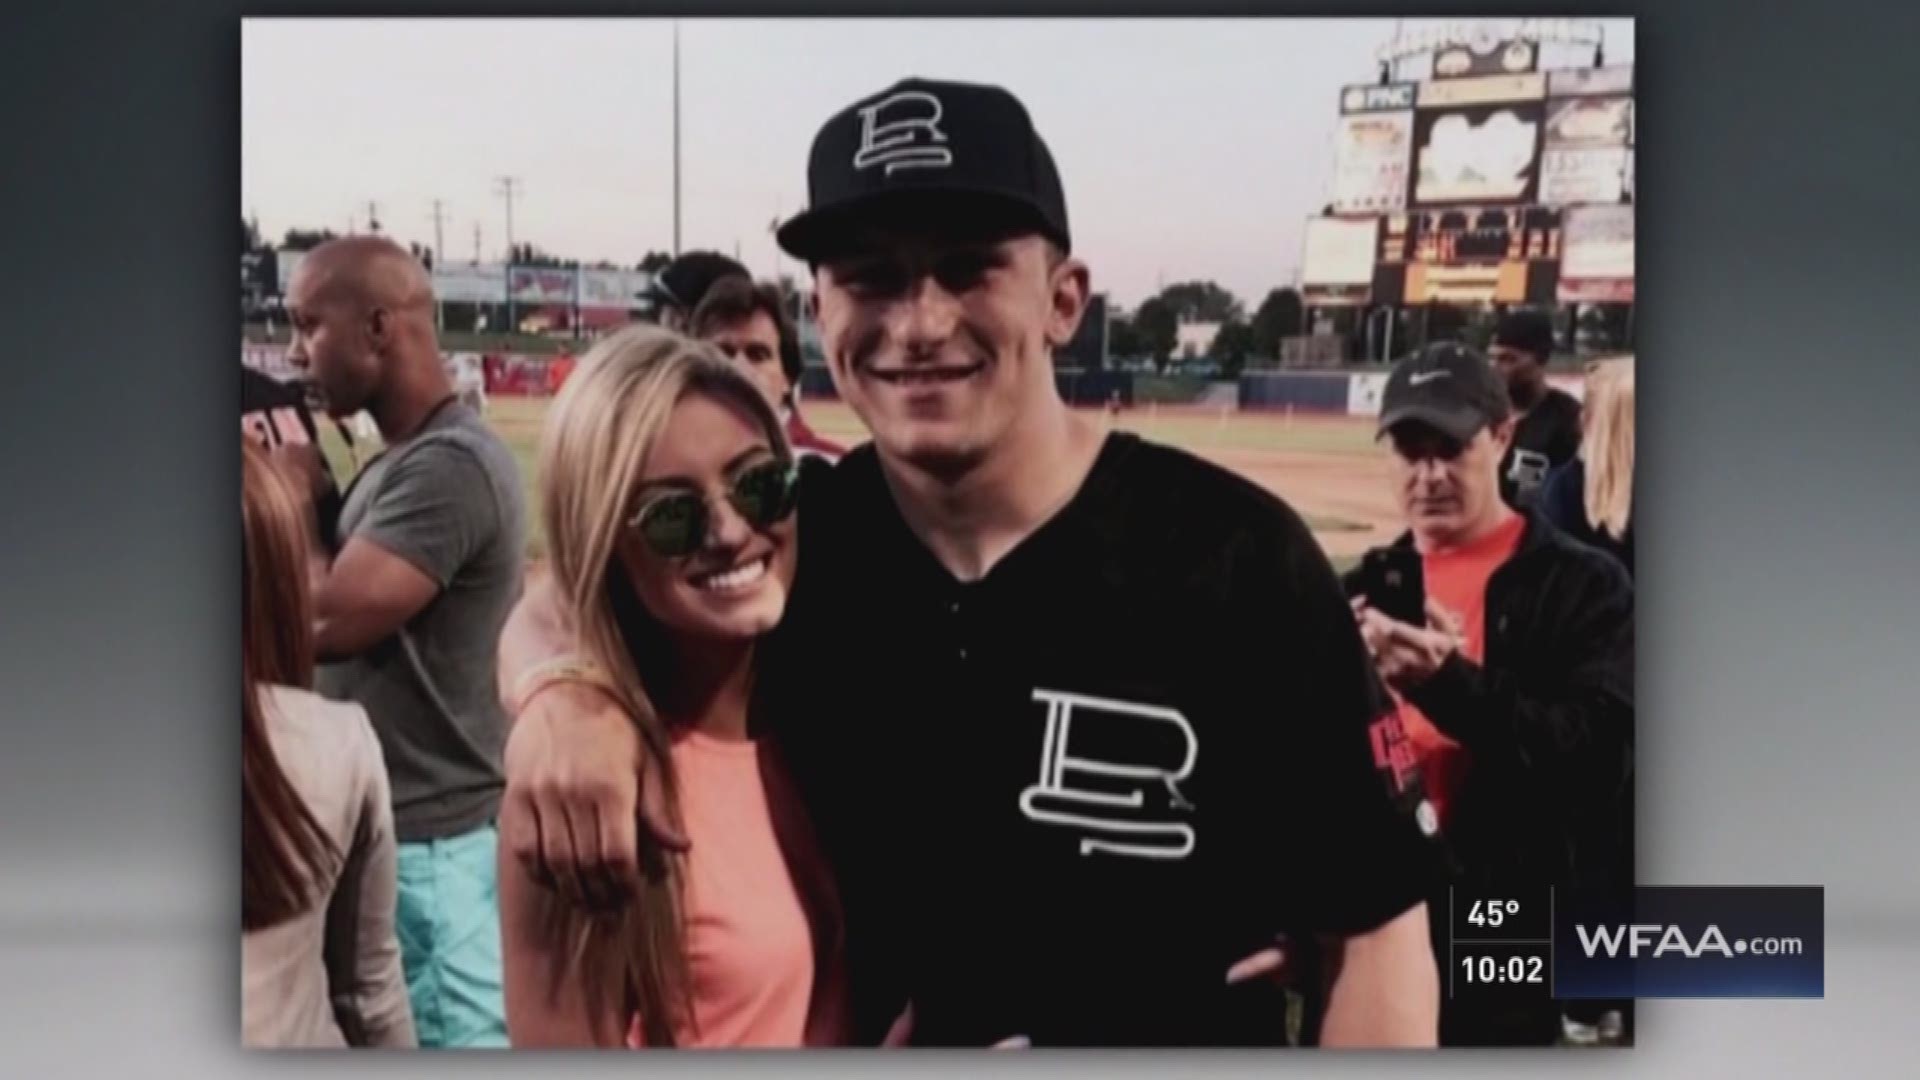 Johnny Manziel's ex-girlfriend told police that the quarterback hit her and threatened to kill her and himself. Rebecca Lopez reports.